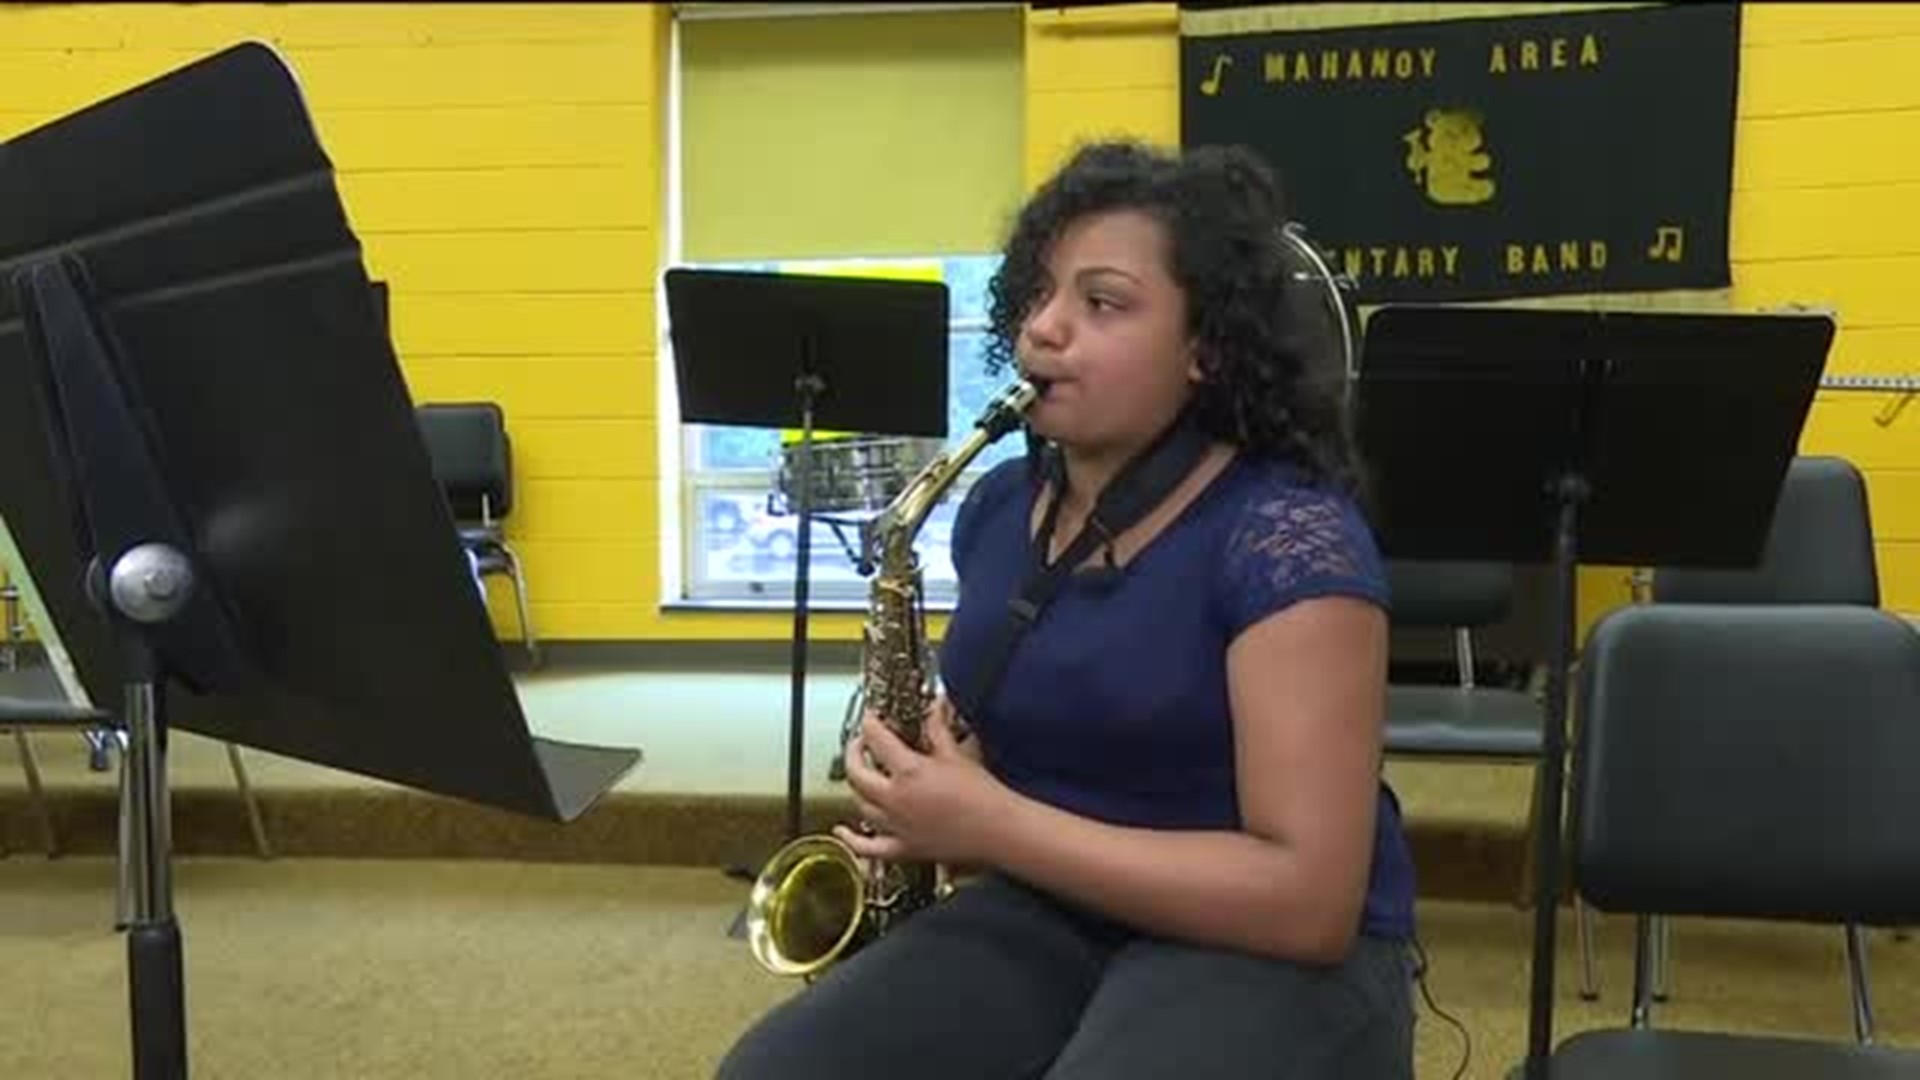 Mahanoy Area Elementary Band Needs Donations of Musical Instruments